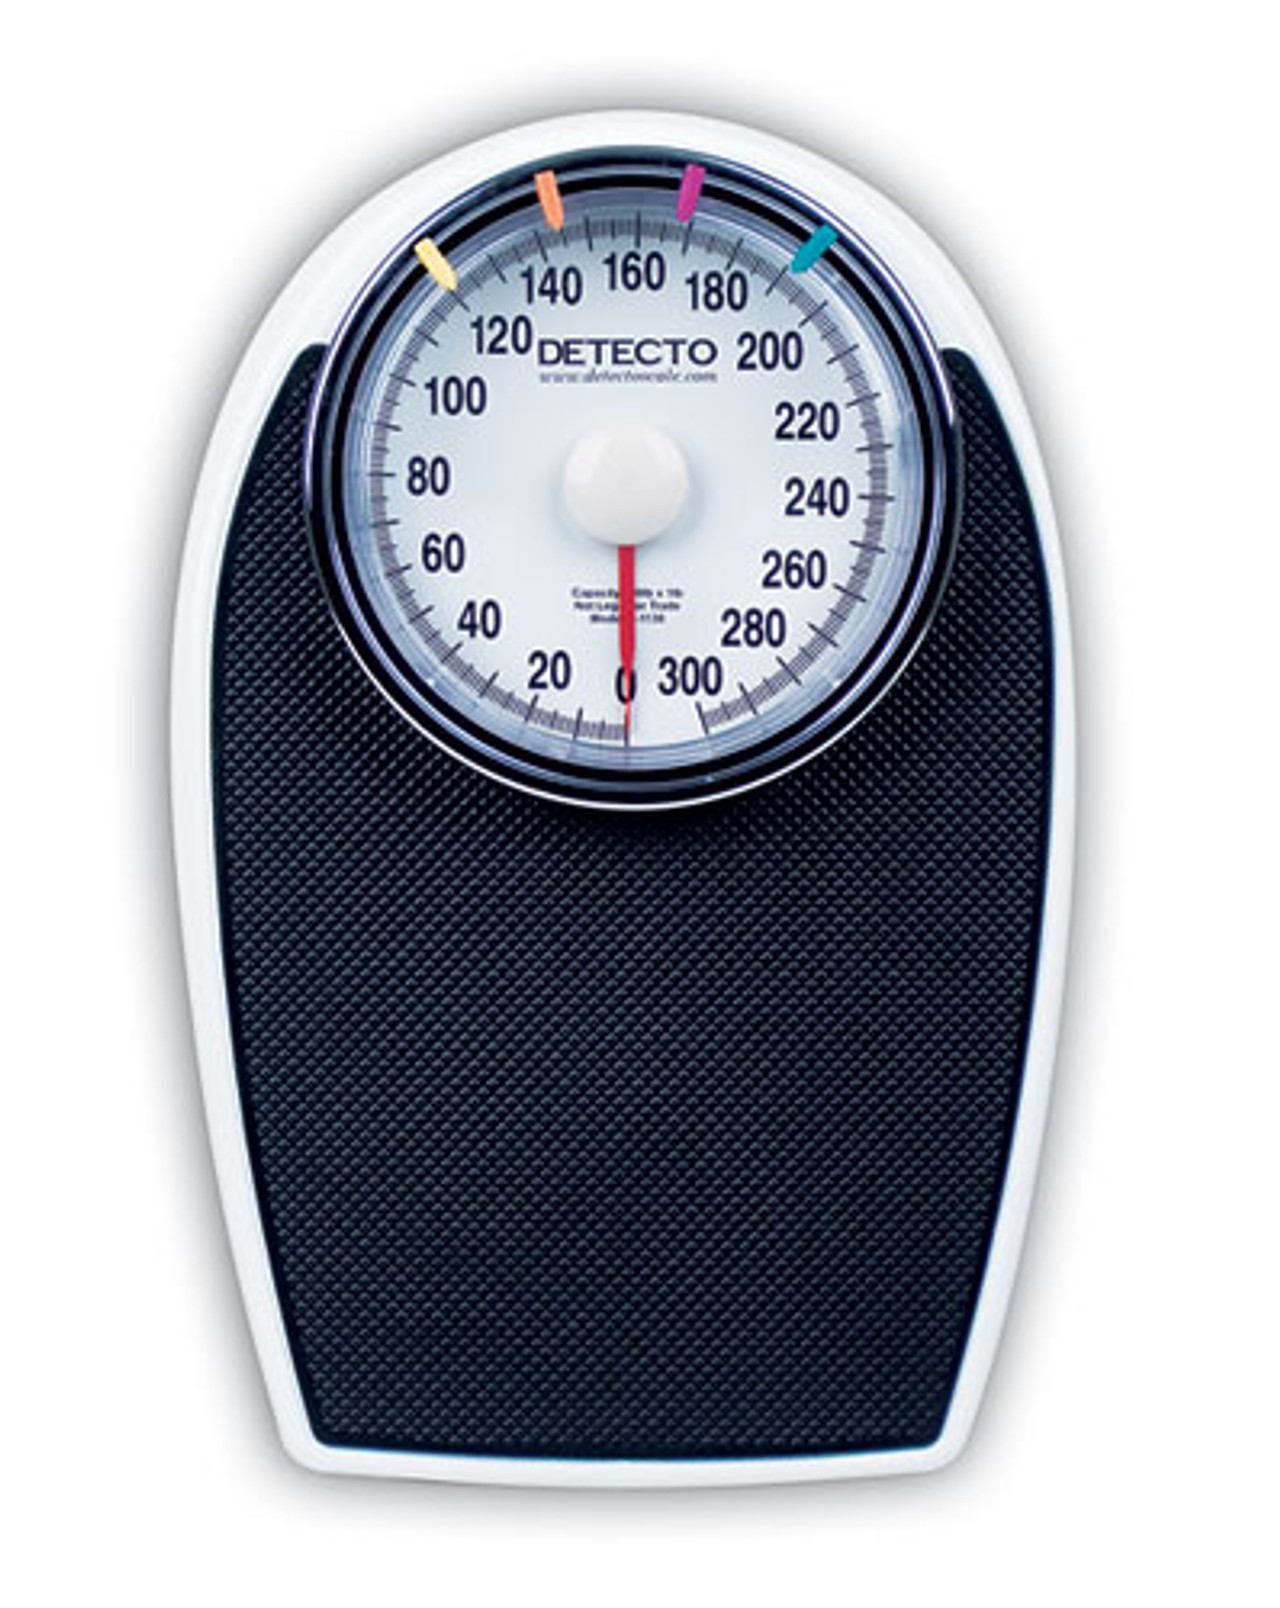 American Weigh ZEO-50 Milligram Scale